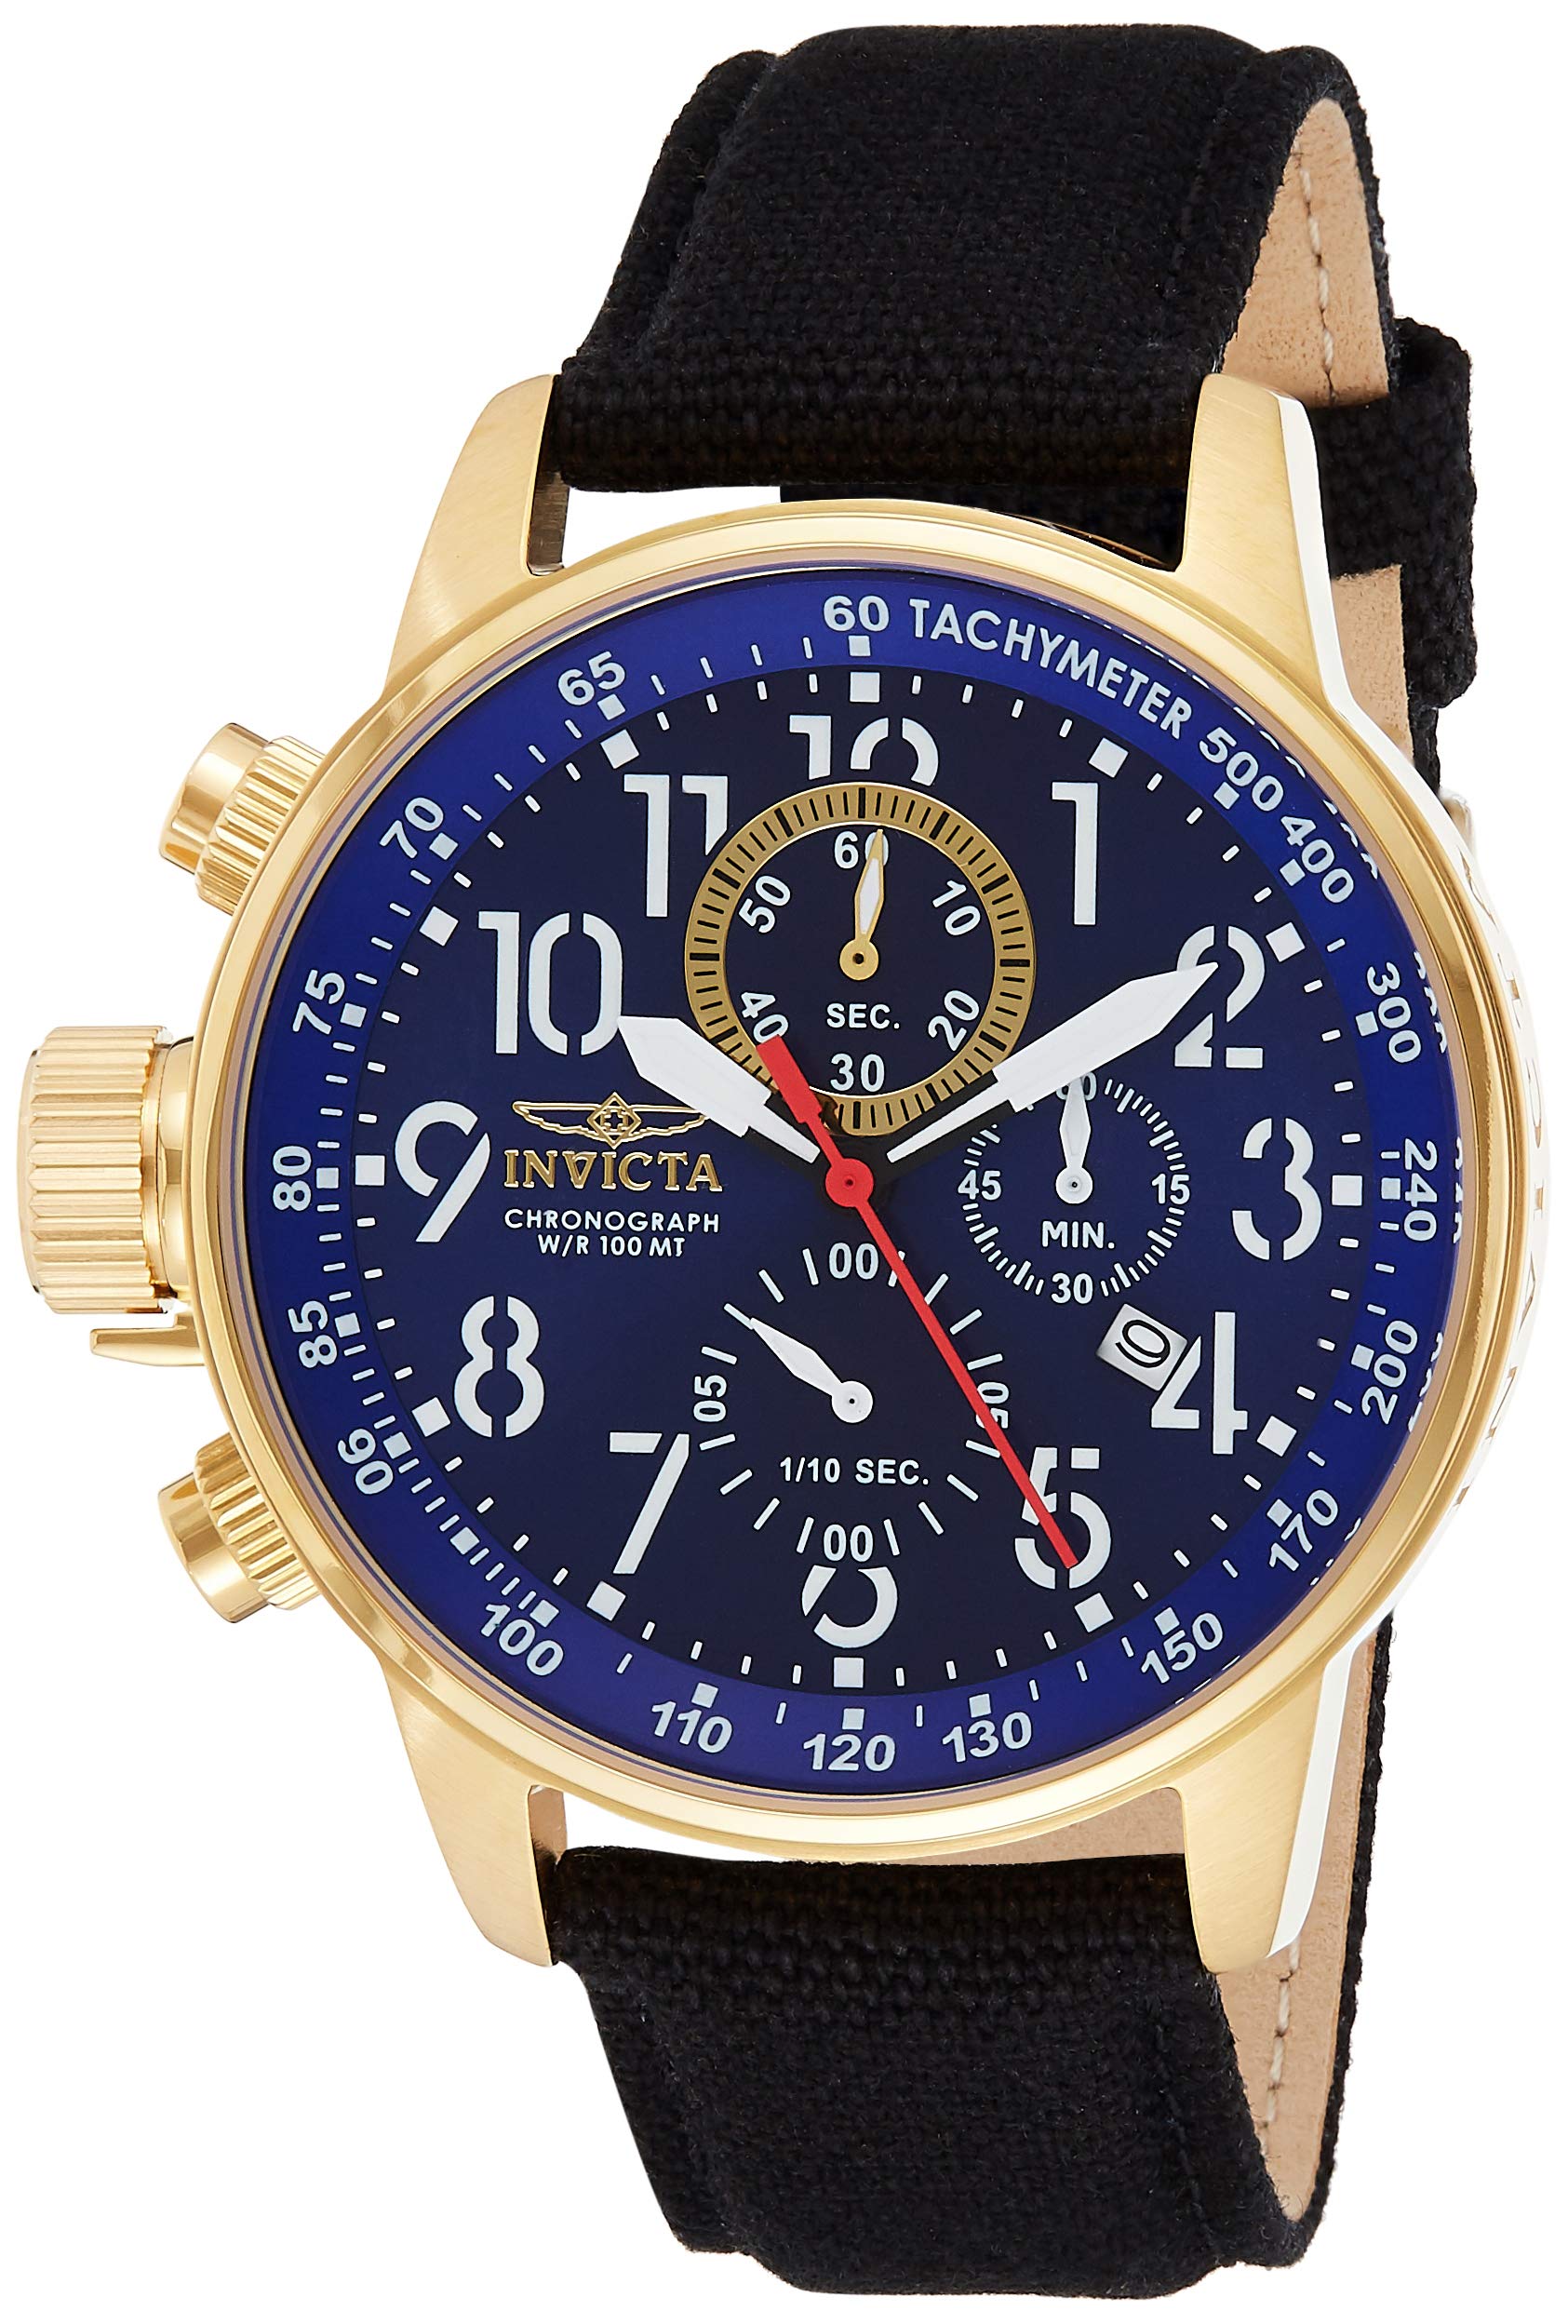 Invicta Men's I Force Collection Chronograph Strap Watch